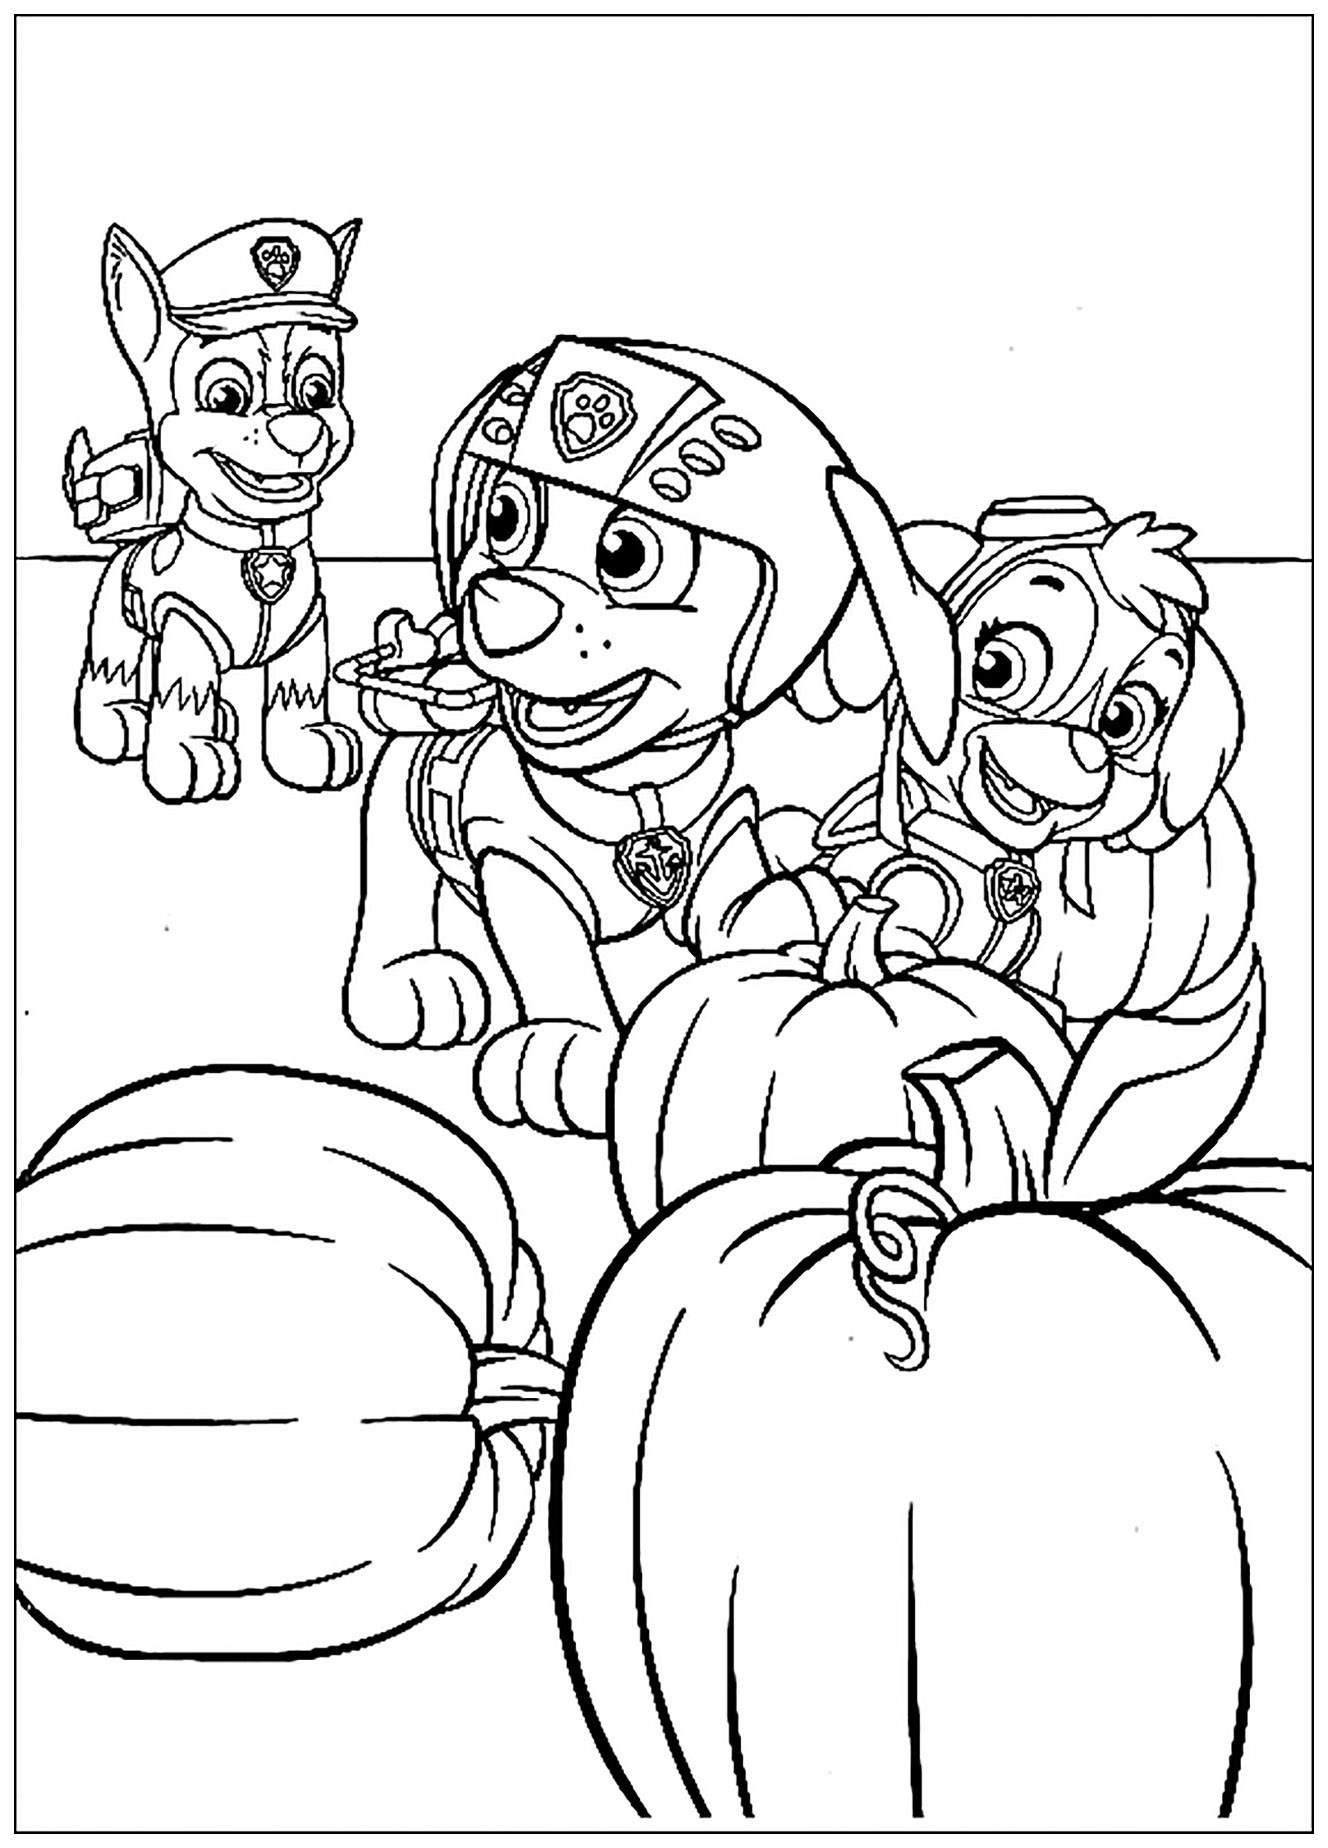 paw patrol to color for kids  paw patrol kids coloring pages